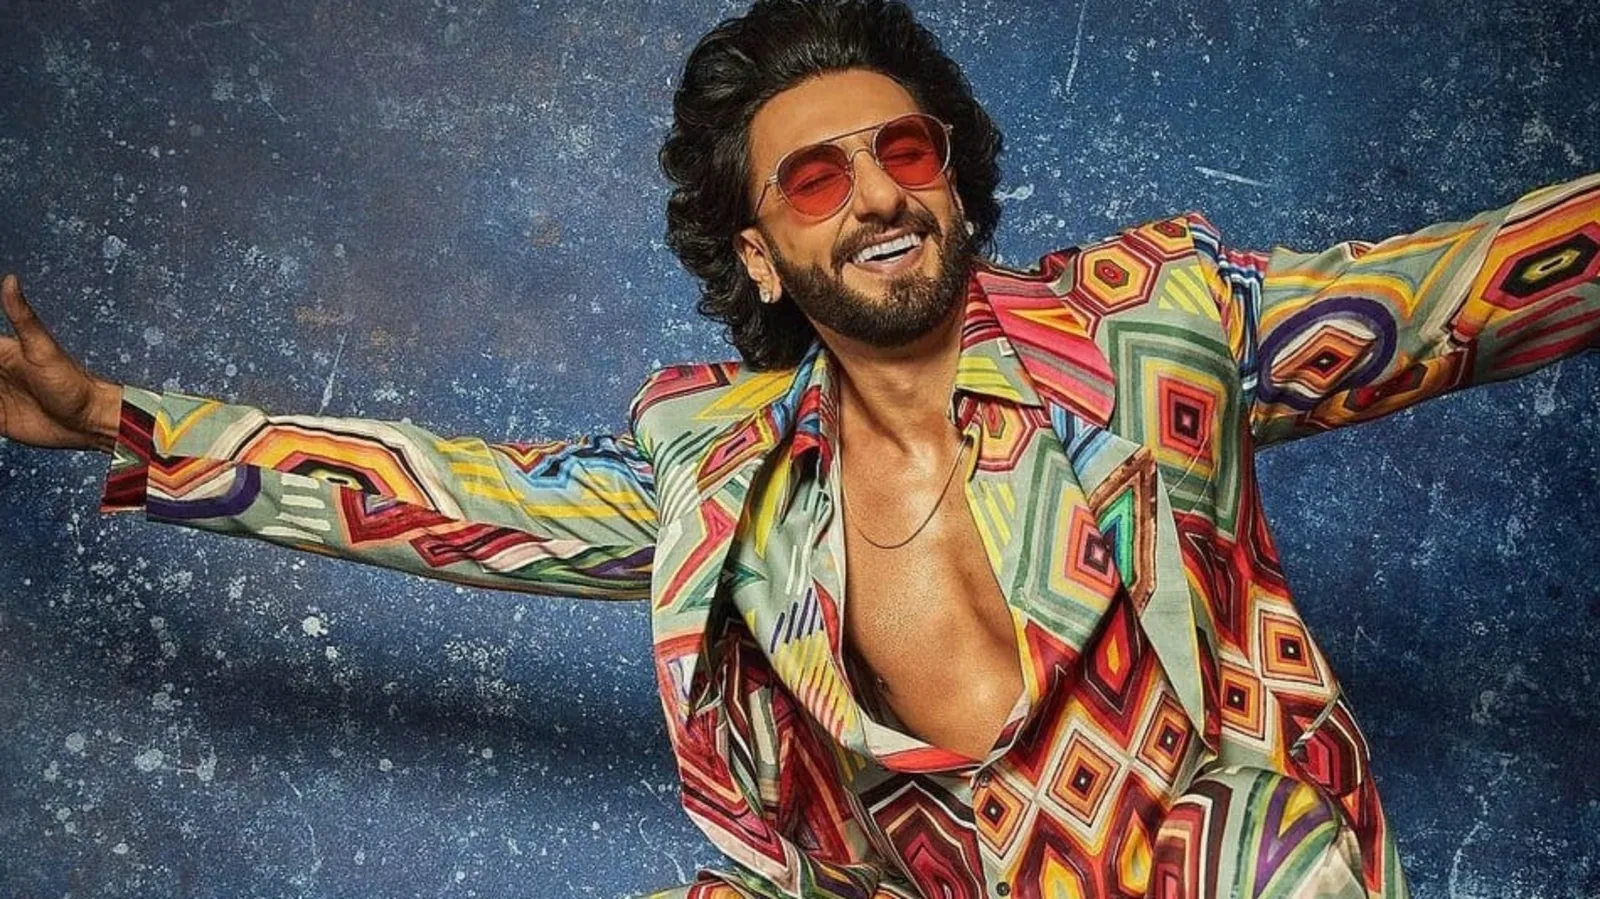 Ranveer Singh says he ‘felt judged’ for his flamboyant fashion sense: ‘Used to feel cagey about expressing myself’